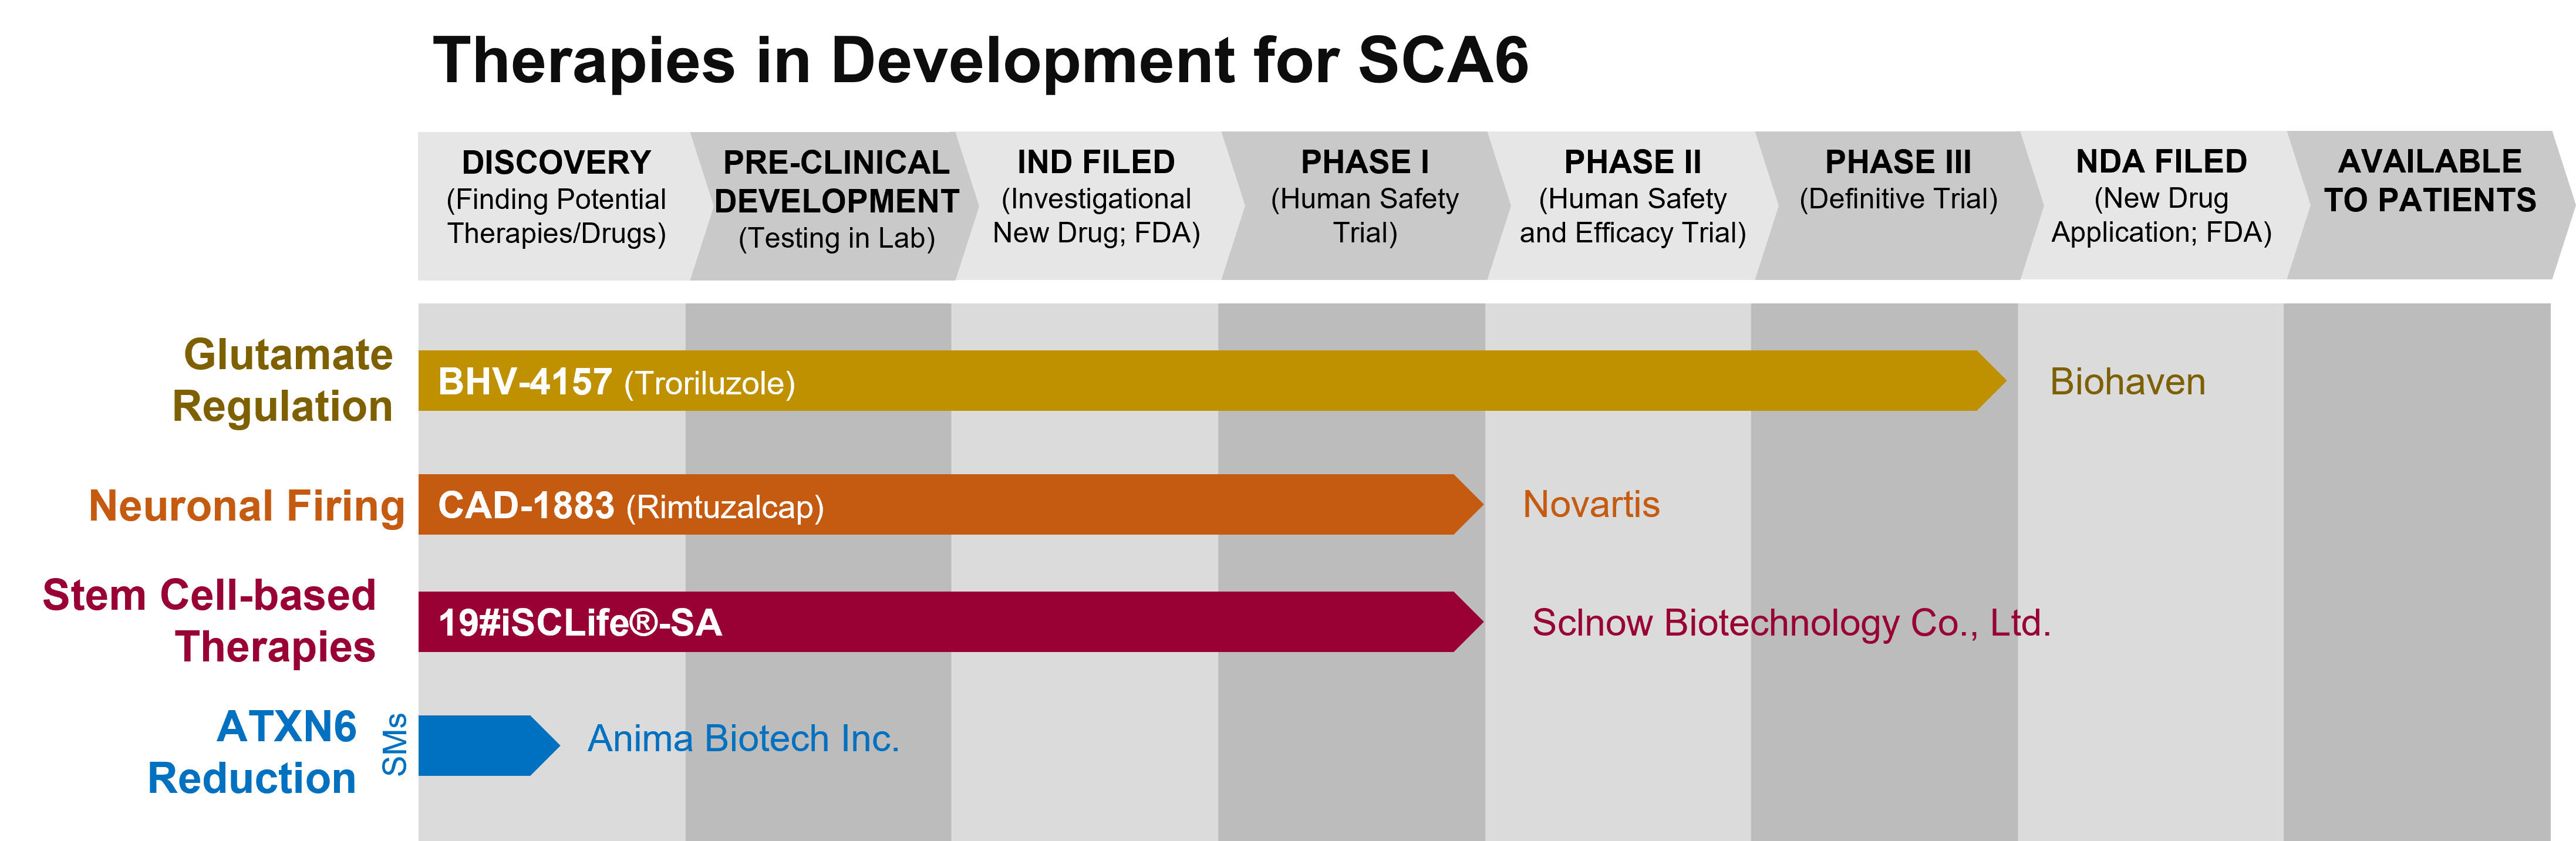 Graph depicting the phase of drug development for various drugs to treat SCA6